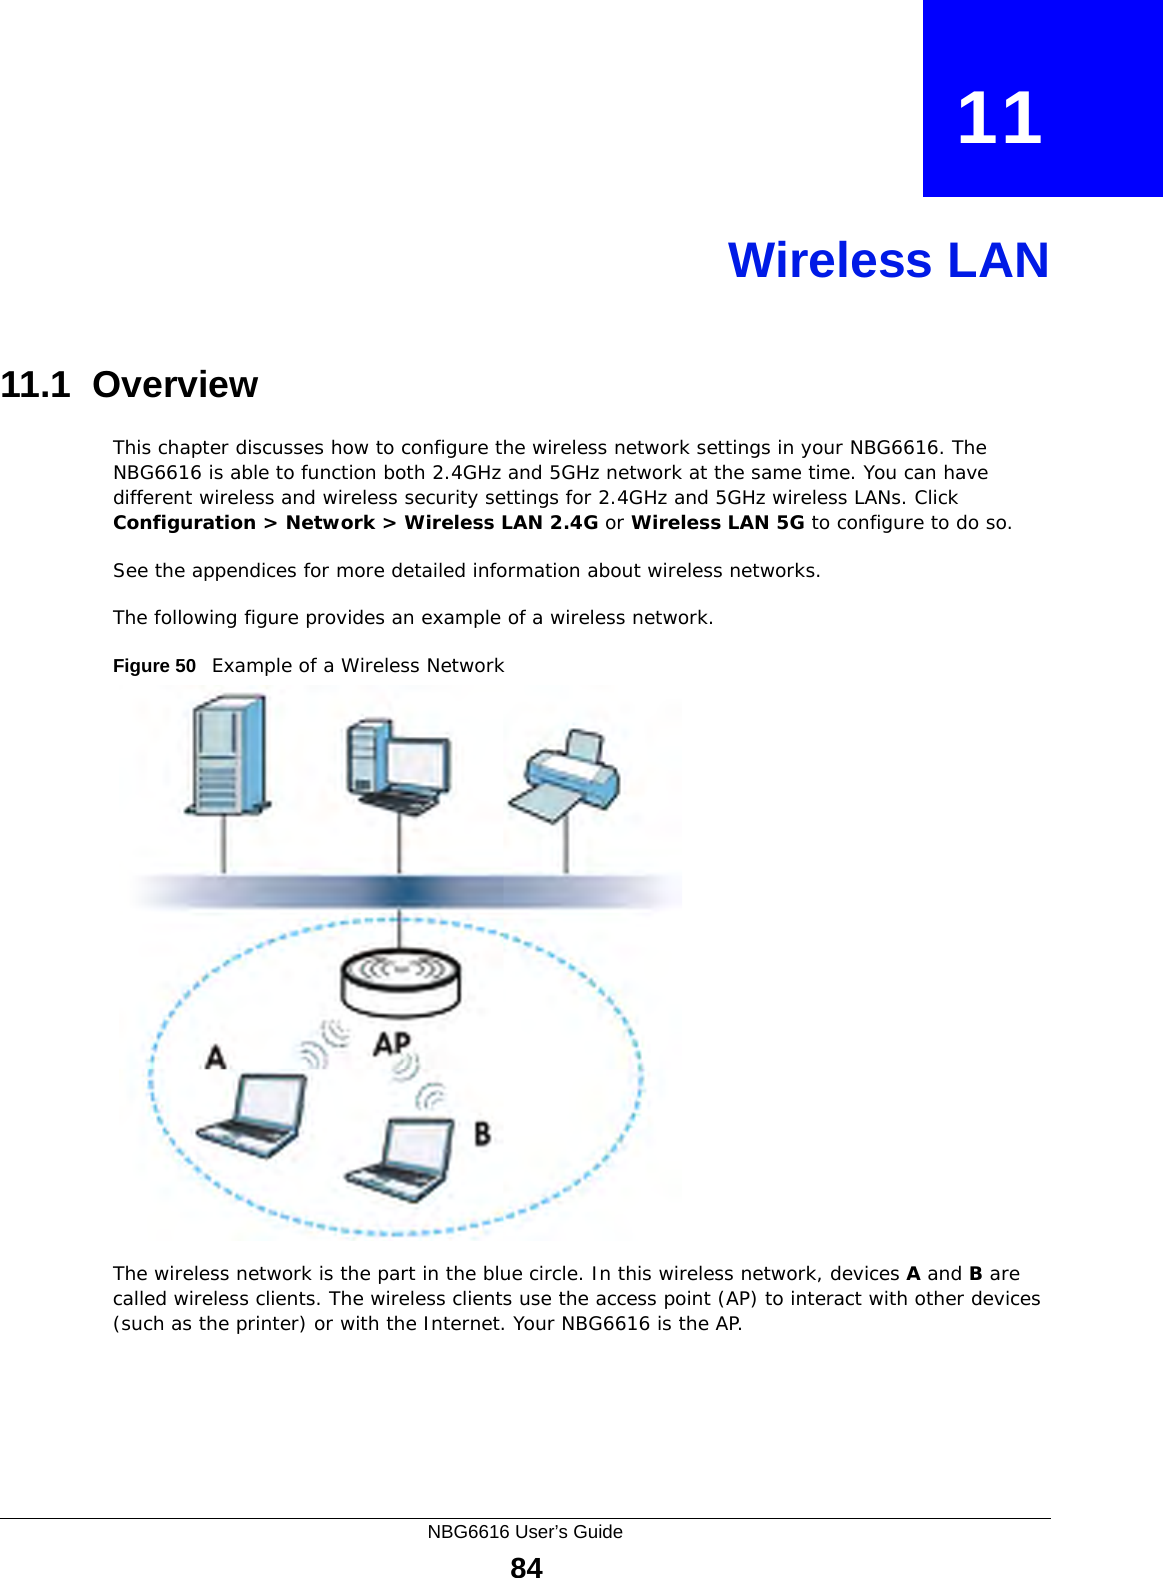 NBG6616 User’s Guide84CHAPTER   11Wireless LAN11.1  OverviewThis chapter discusses how to configure the wireless network settings in your NBG6616. The NBG6616 is able to function both 2.4GHz and 5GHz network at the same time. You can have different wireless and wireless security settings for 2.4GHz and 5GHz wireless LANs. Click Configuration &gt; Network &gt; Wireless LAN 2.4G or Wireless LAN 5G to configure to do so.See the appendices for more detailed information about wireless networks.The following figure provides an example of a wireless network.Figure 50   Example of a Wireless NetworkThe wireless network is the part in the blue circle. In this wireless network, devices A and B are called wireless clients. The wireless clients use the access point (AP) to interact with other devices (such as the printer) or with the Internet. Your NBG6616 is the AP.